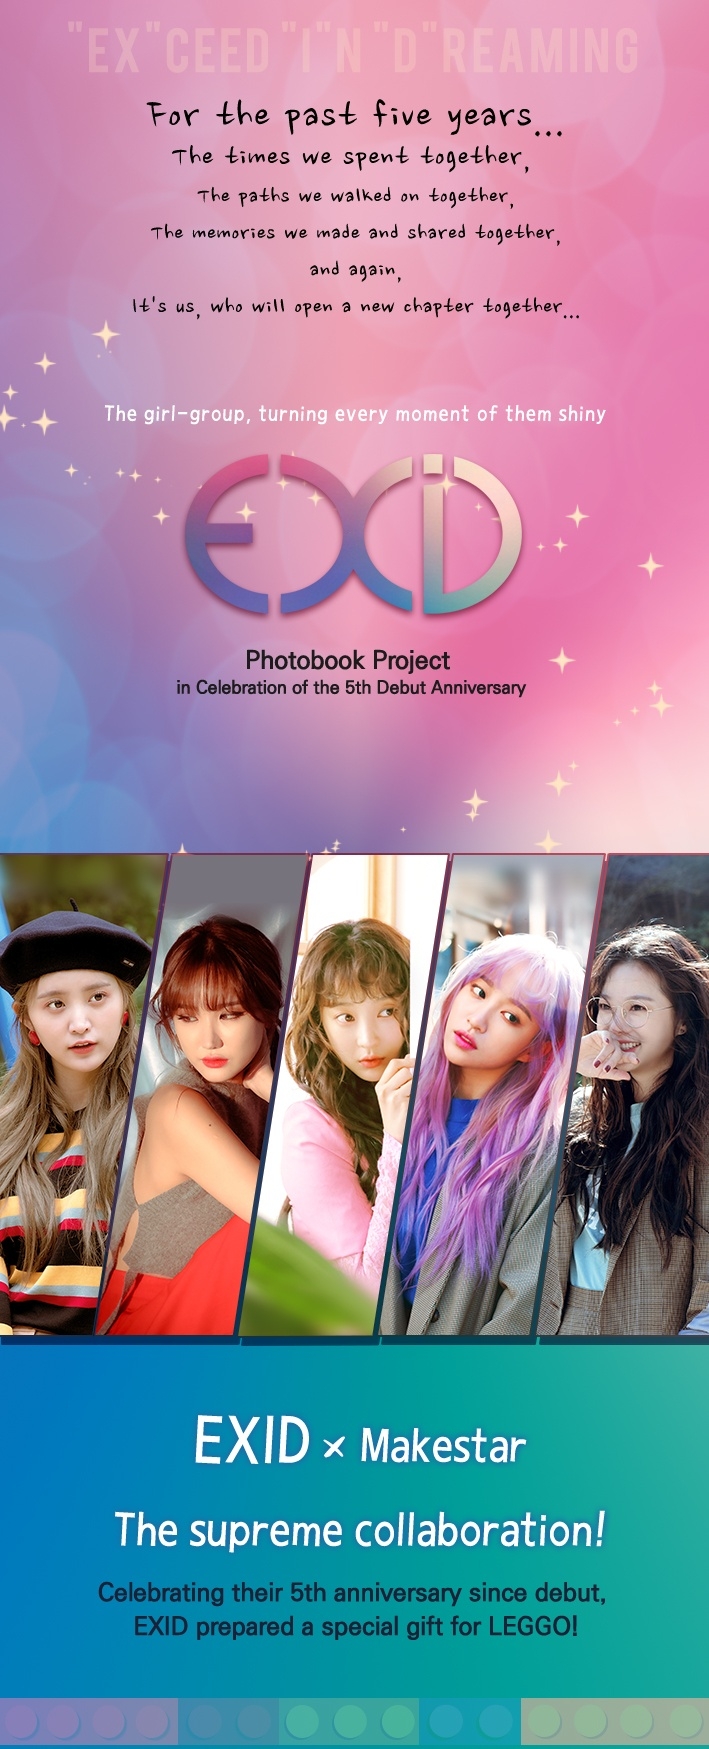 Celebrating the 5th Debut Anniversary, EXID Photobook Project